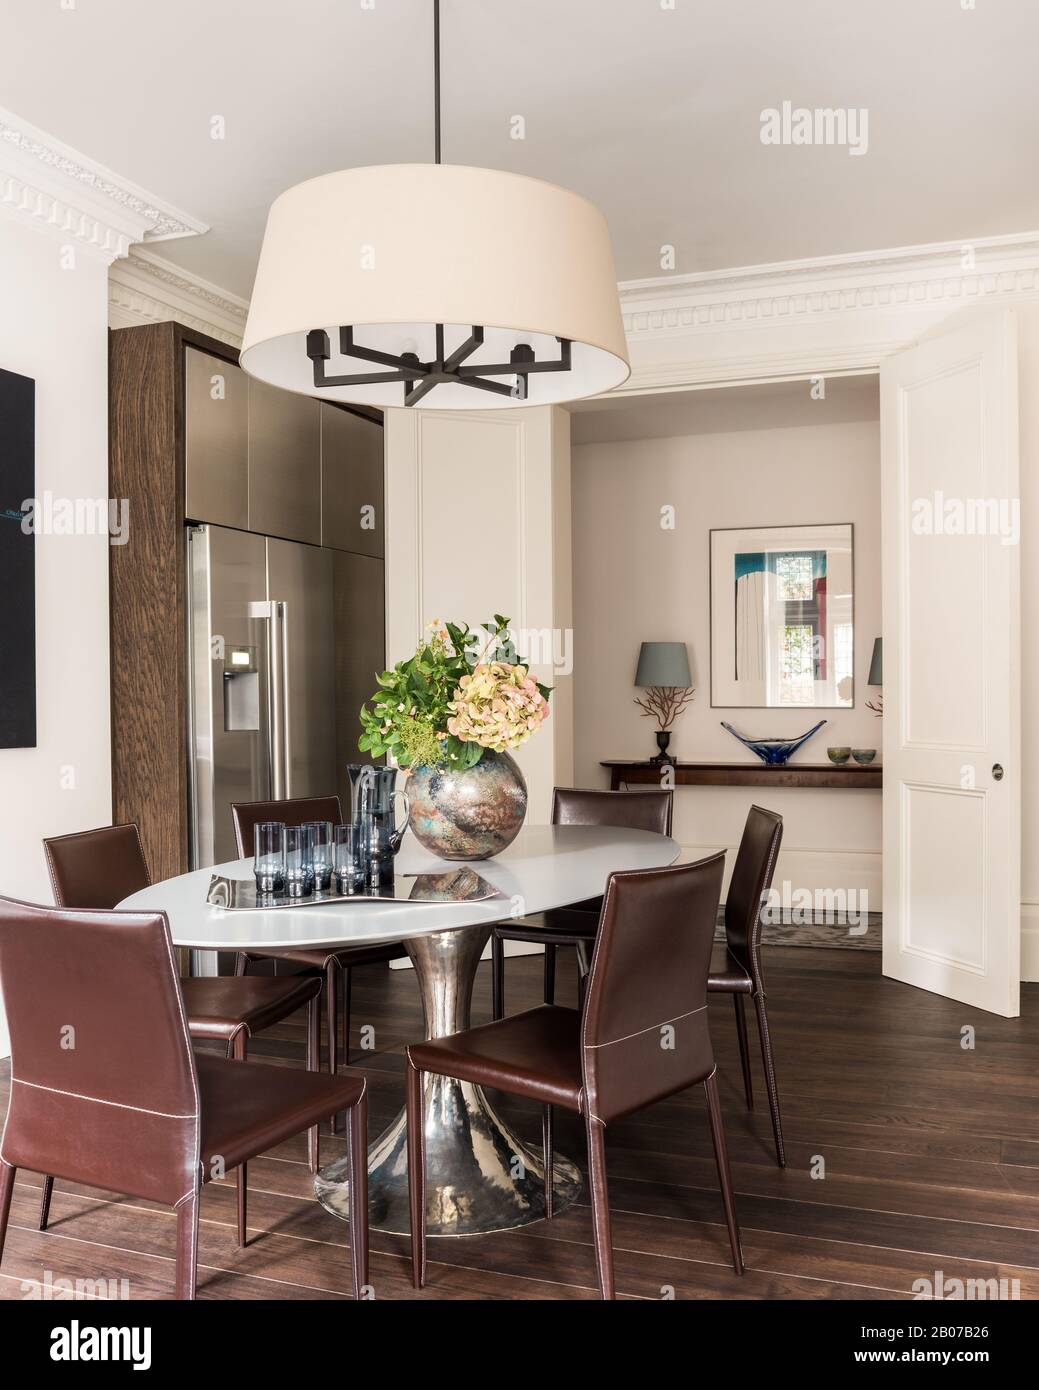 Dining table under pendant light by refrigerator Stock Photo